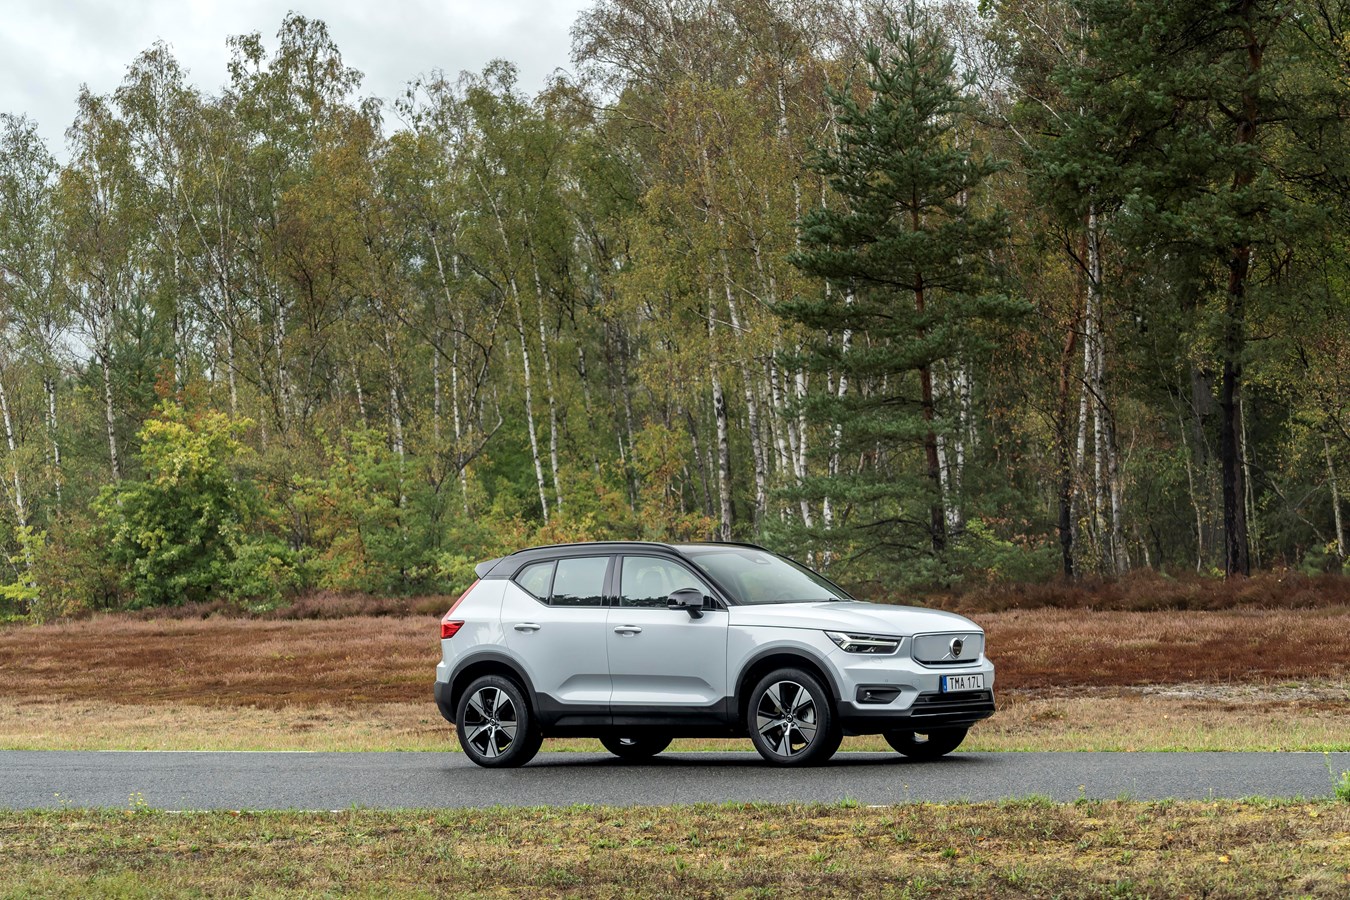 Volvo XC40 Recharge P8 AWD - Mortefontaine - septembre 2020